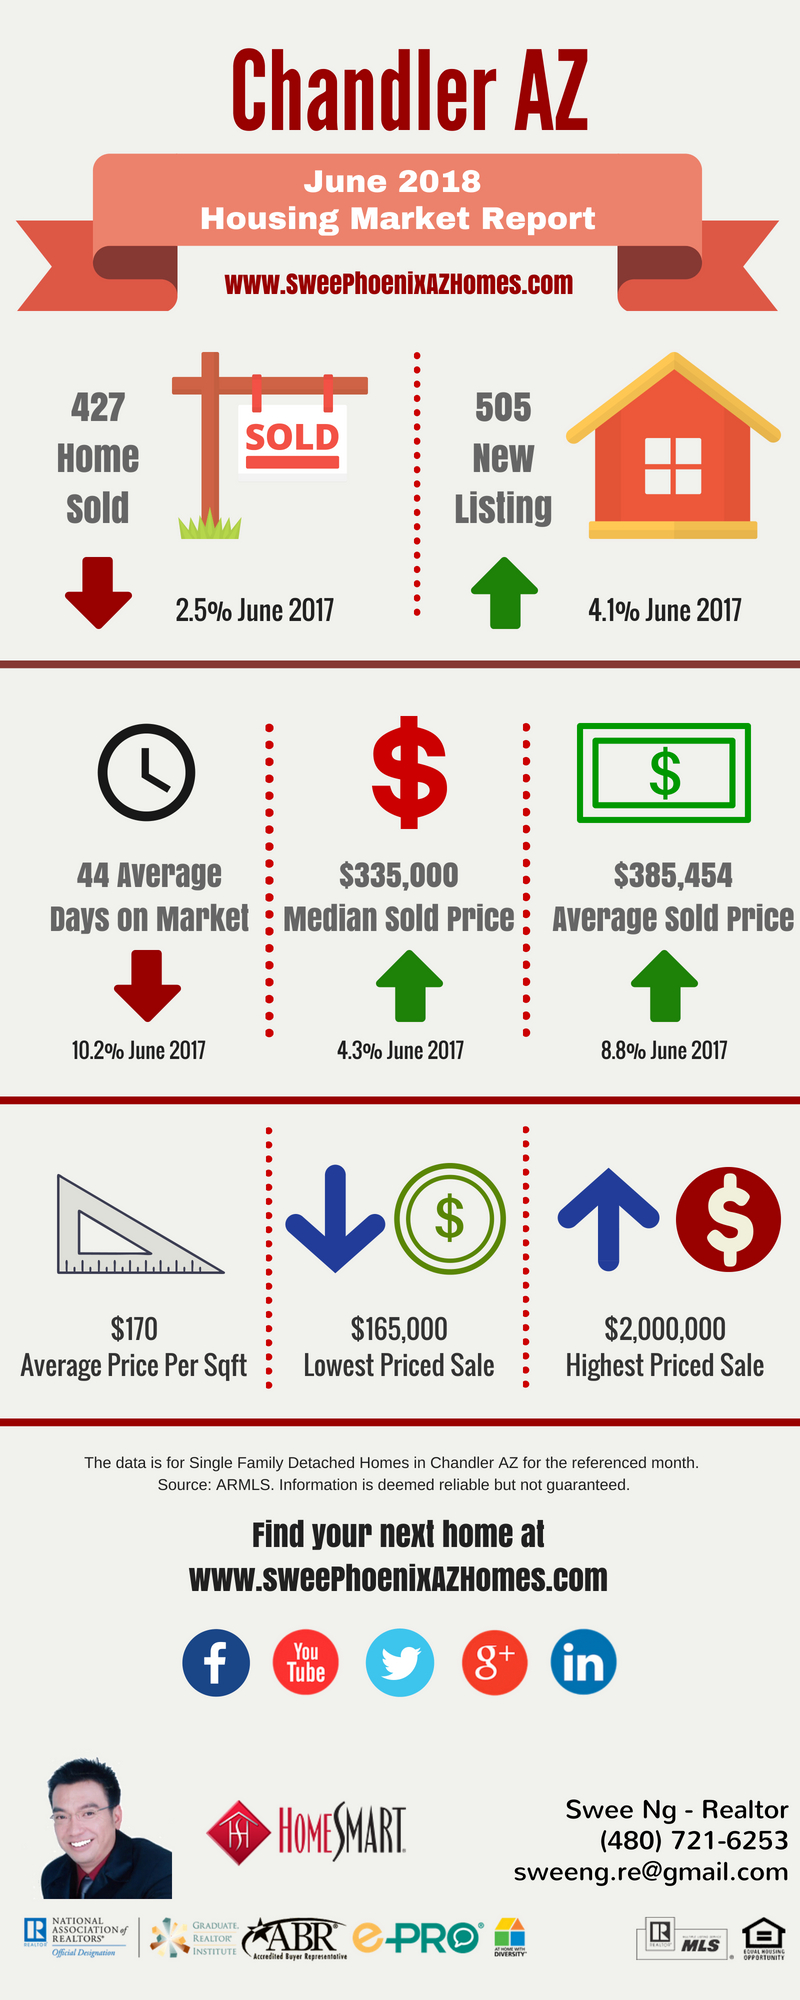 Chandler AZ Housing Market Update June 2018 by Swee Ng, House Value and Real Estate Listings